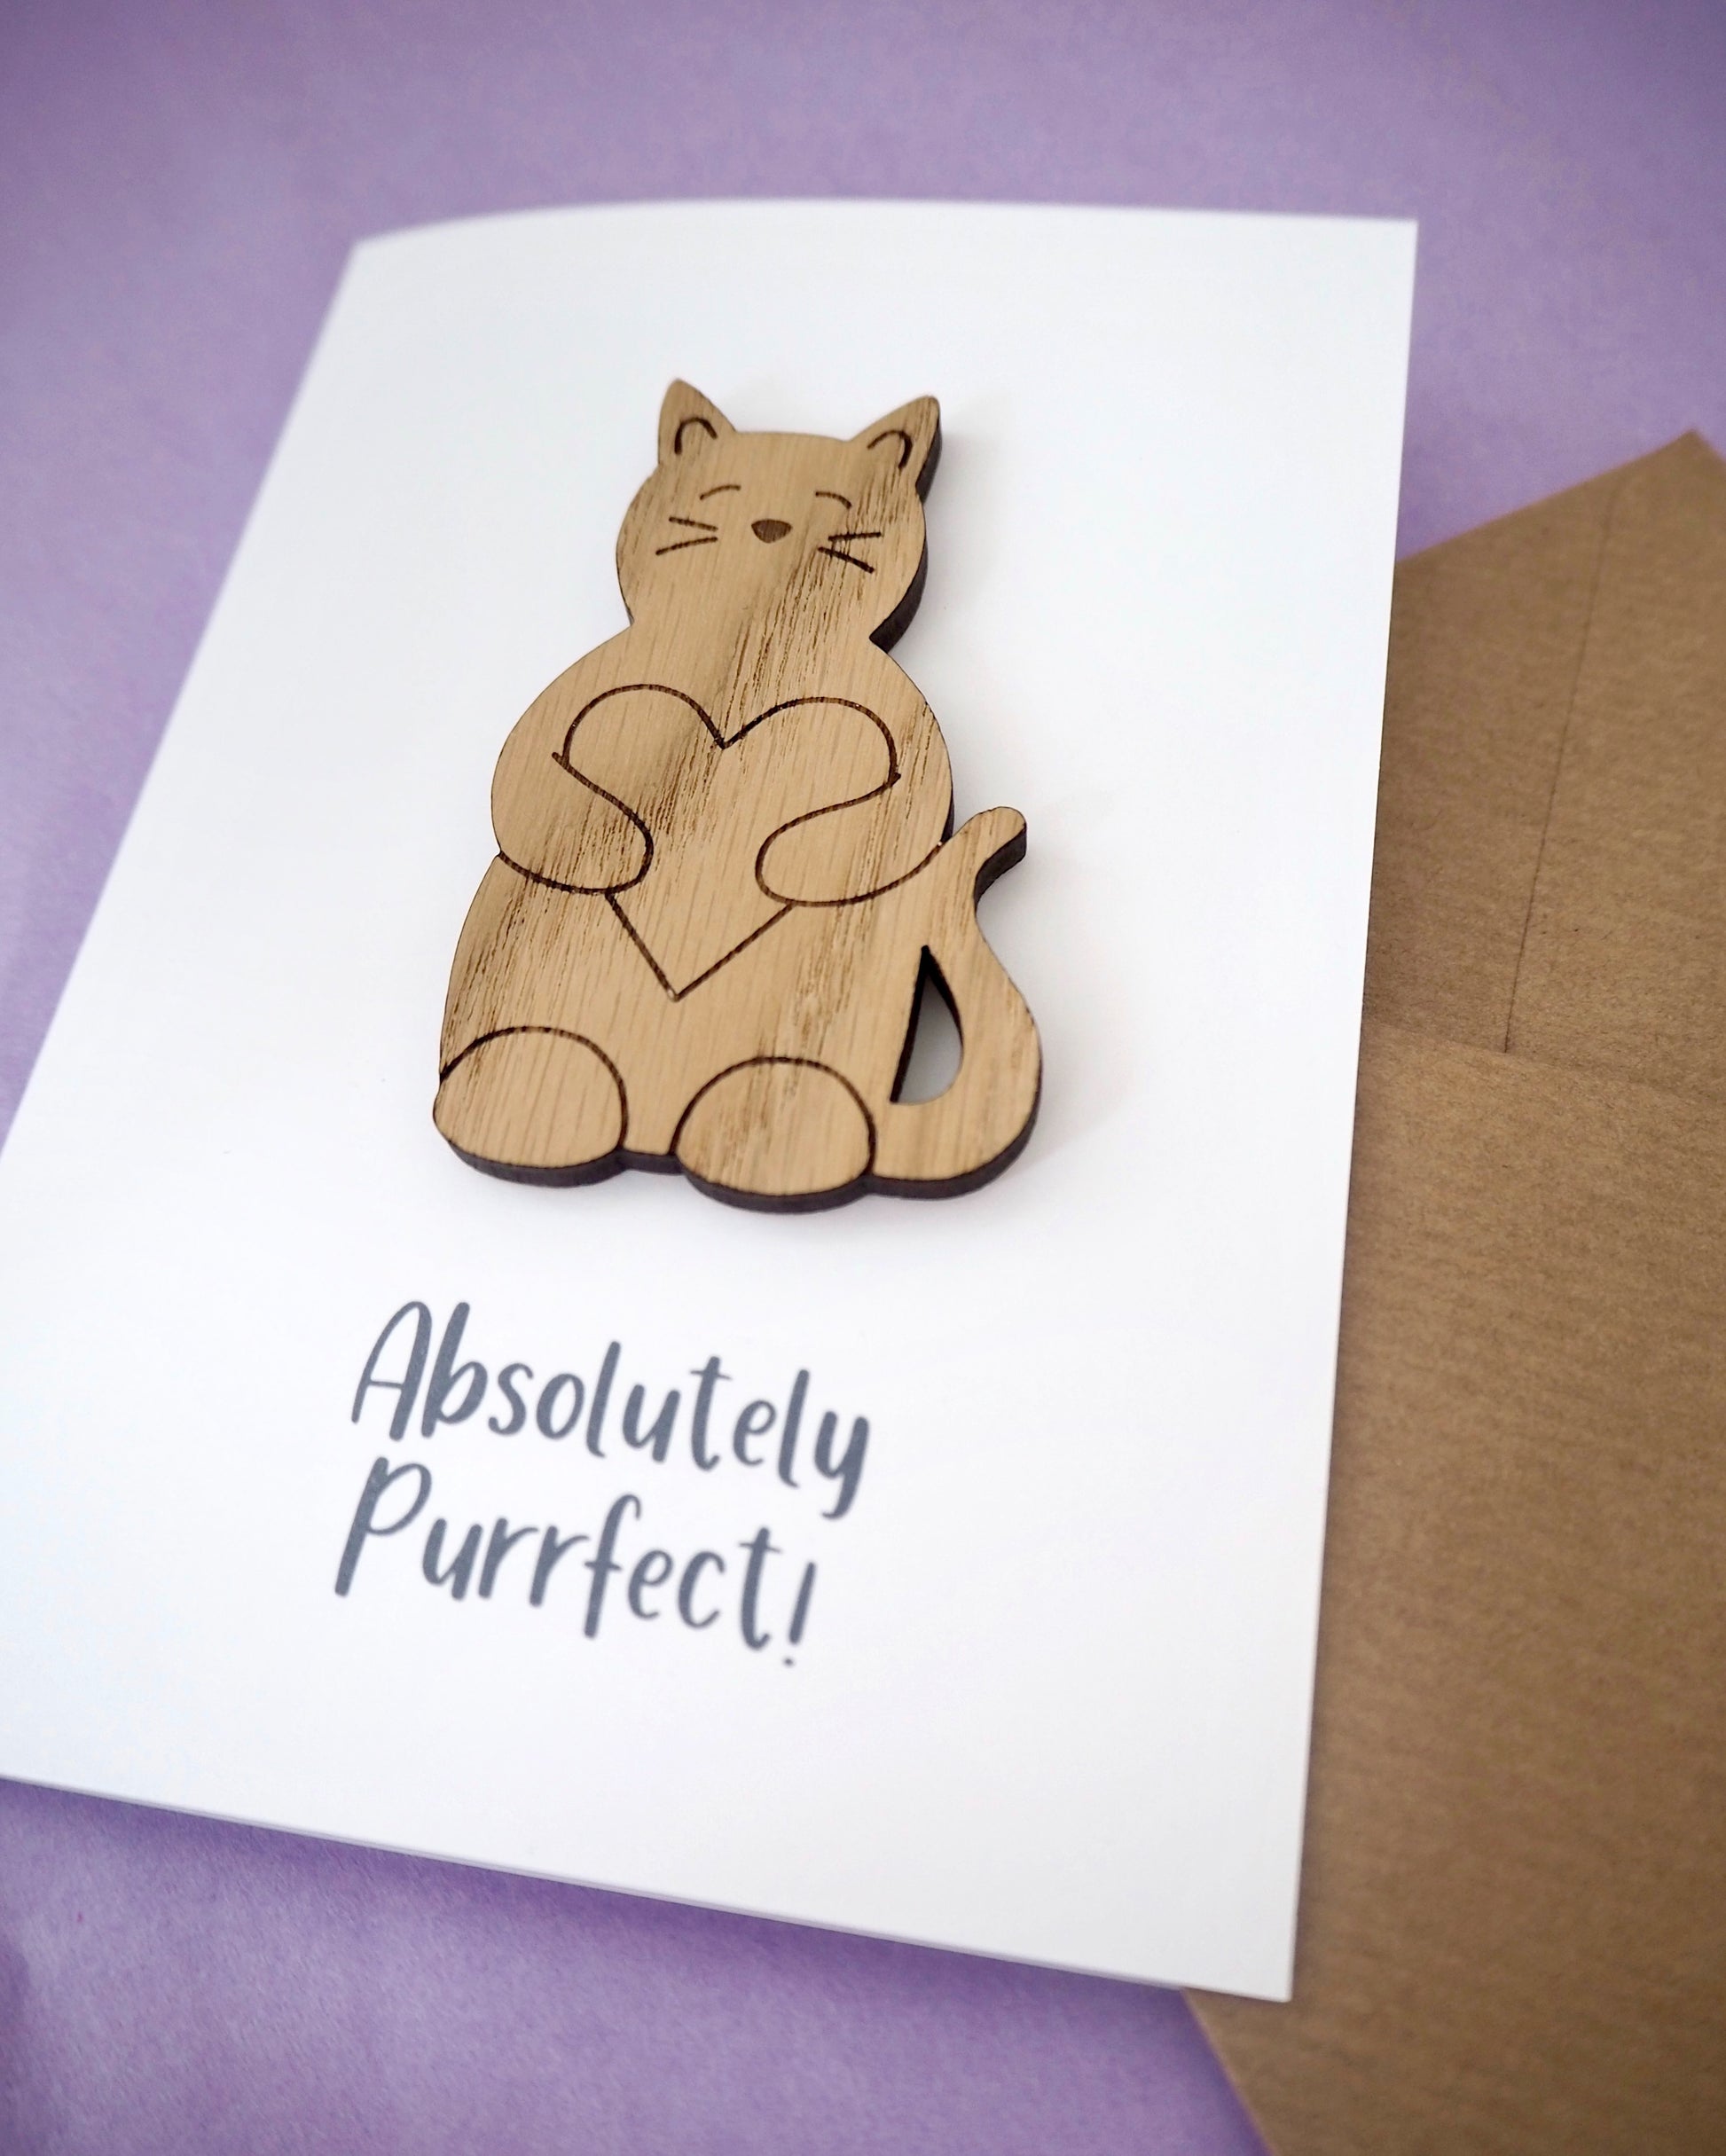 cat card with wooden cat and absolutely purrfect text